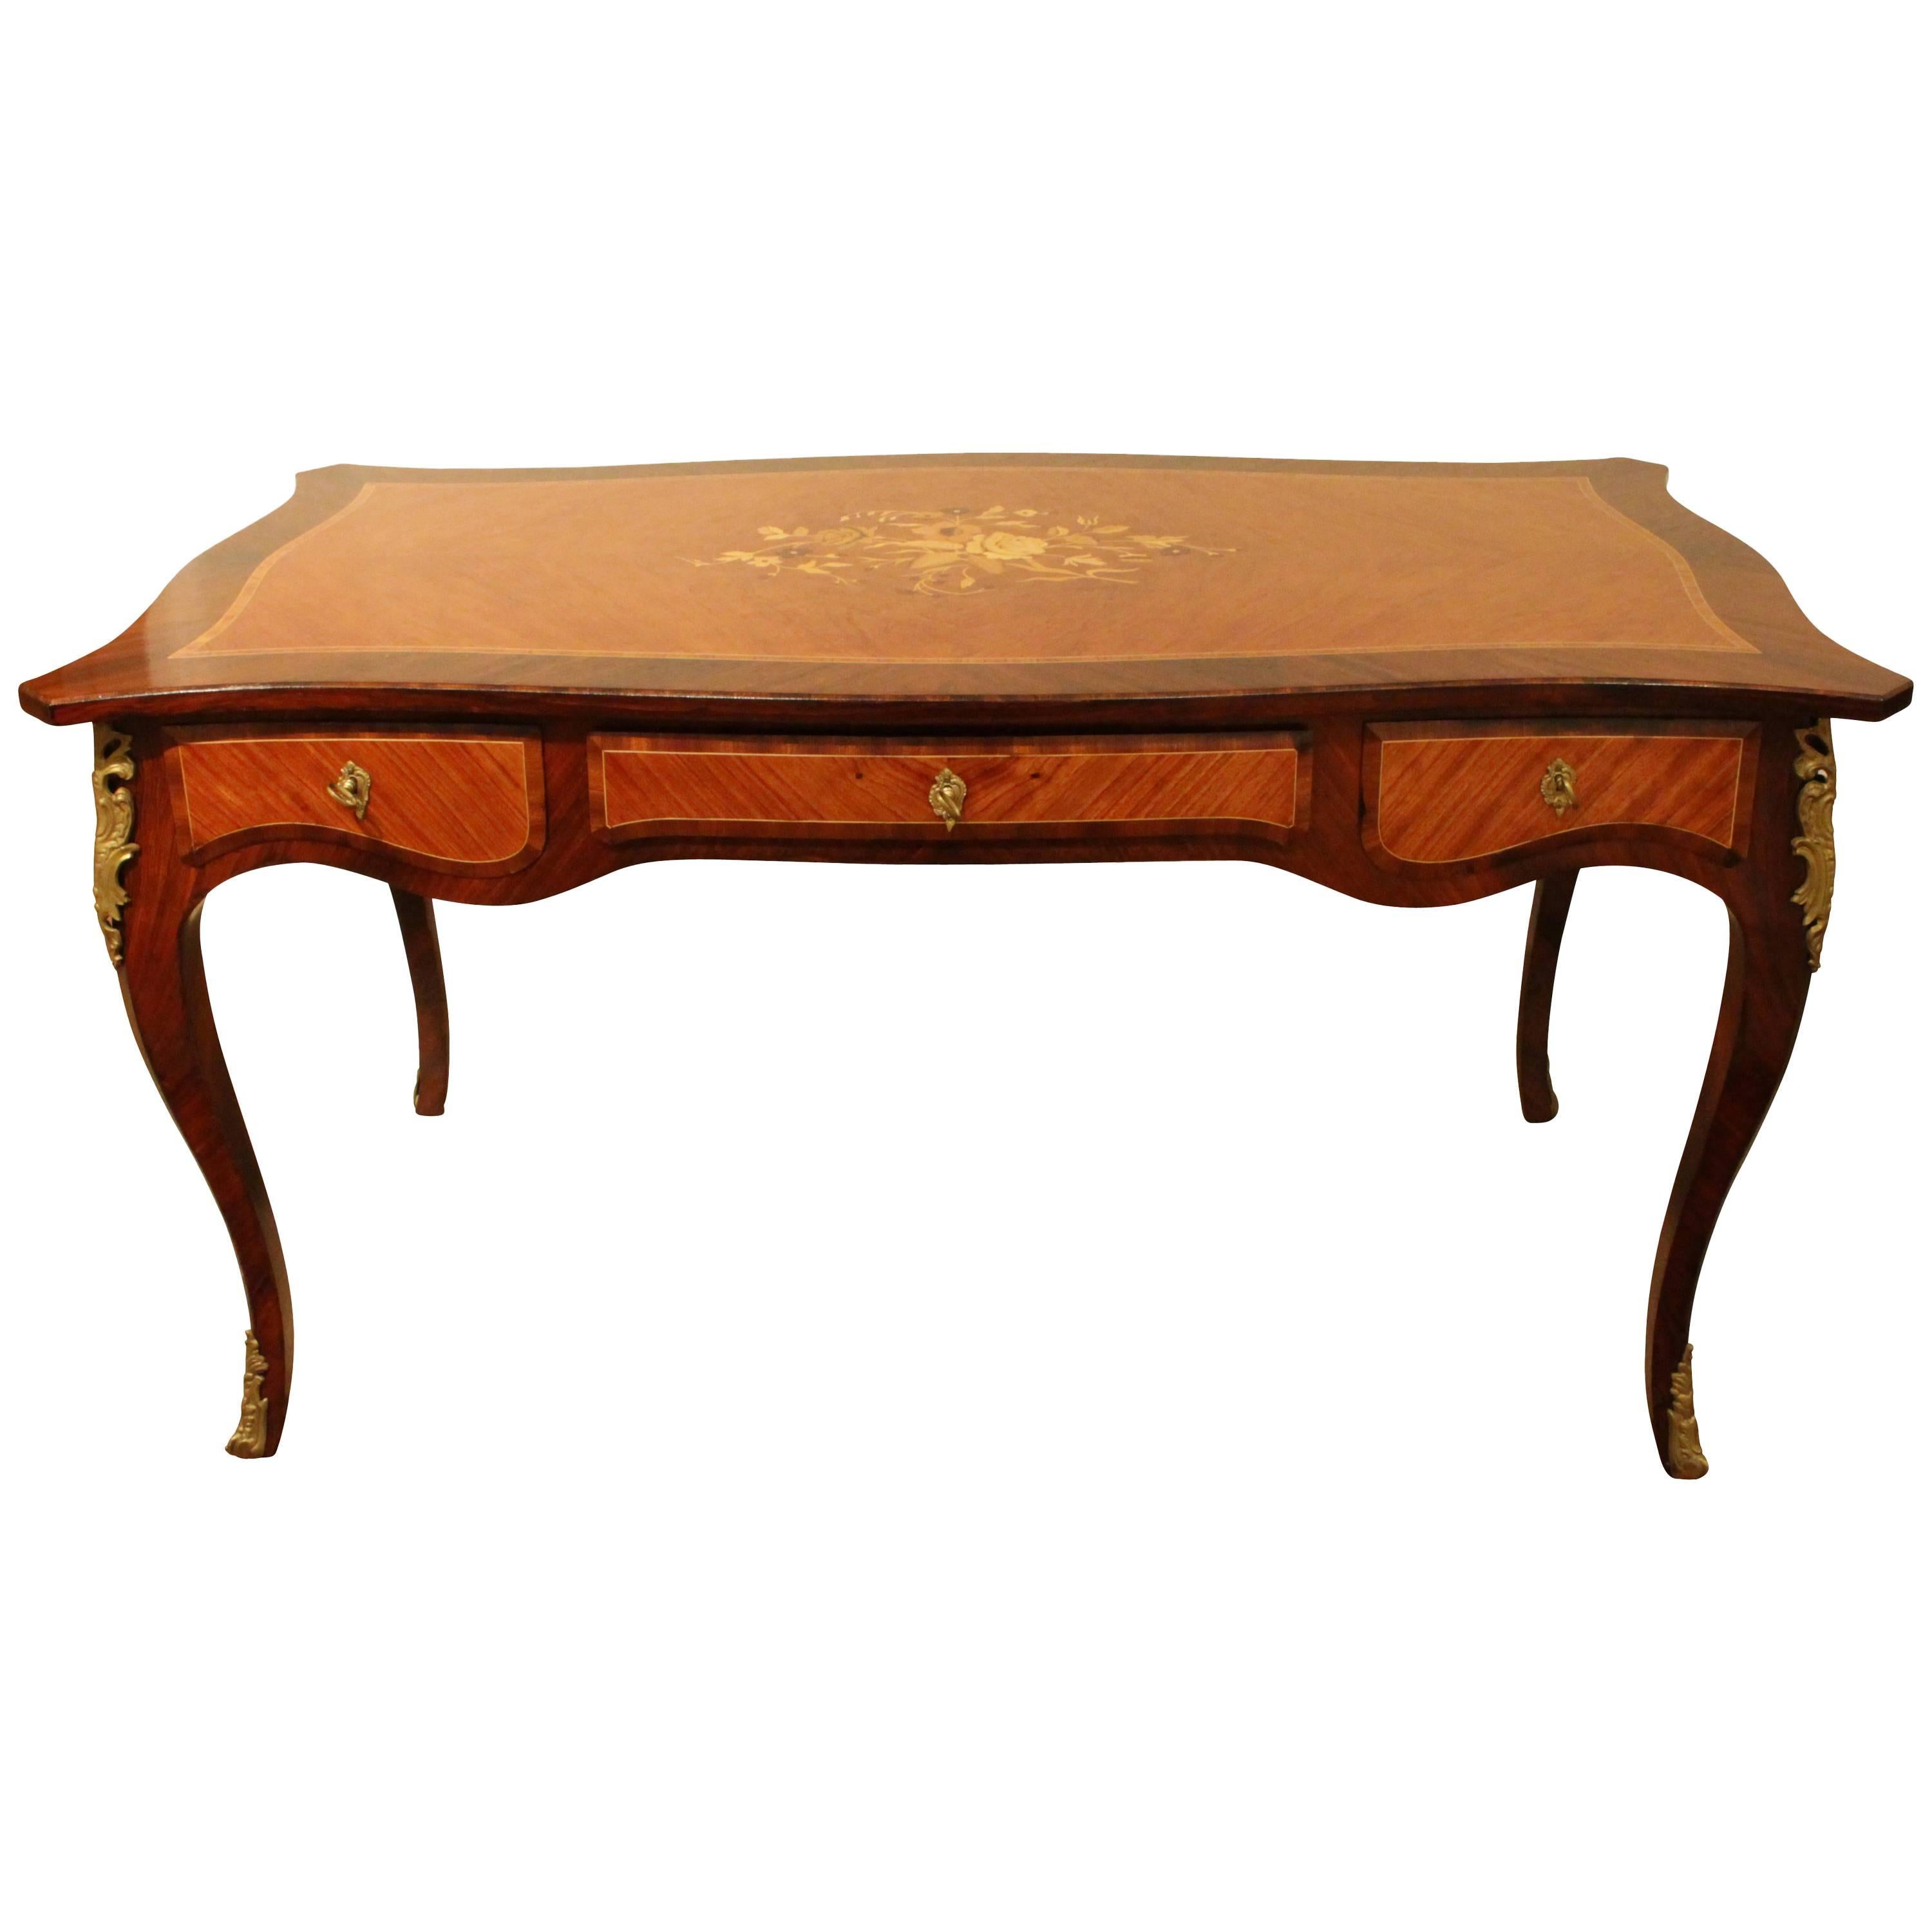 French Desk Bureau Plat in the Louis XV Style with Marquetry of Fruitwood